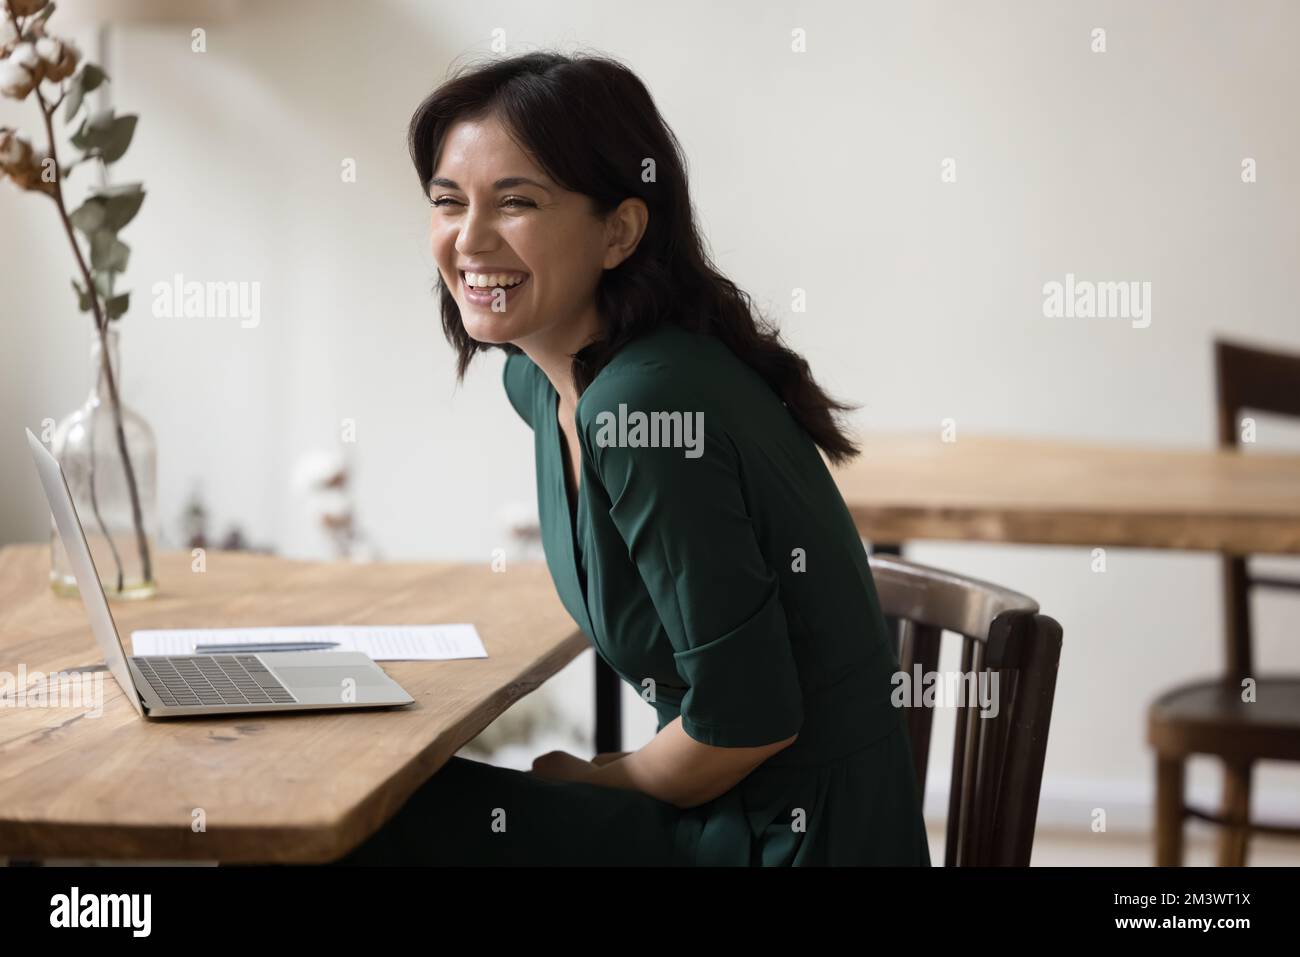 Happy excited laptop user woman laughing at joke Stock Photo